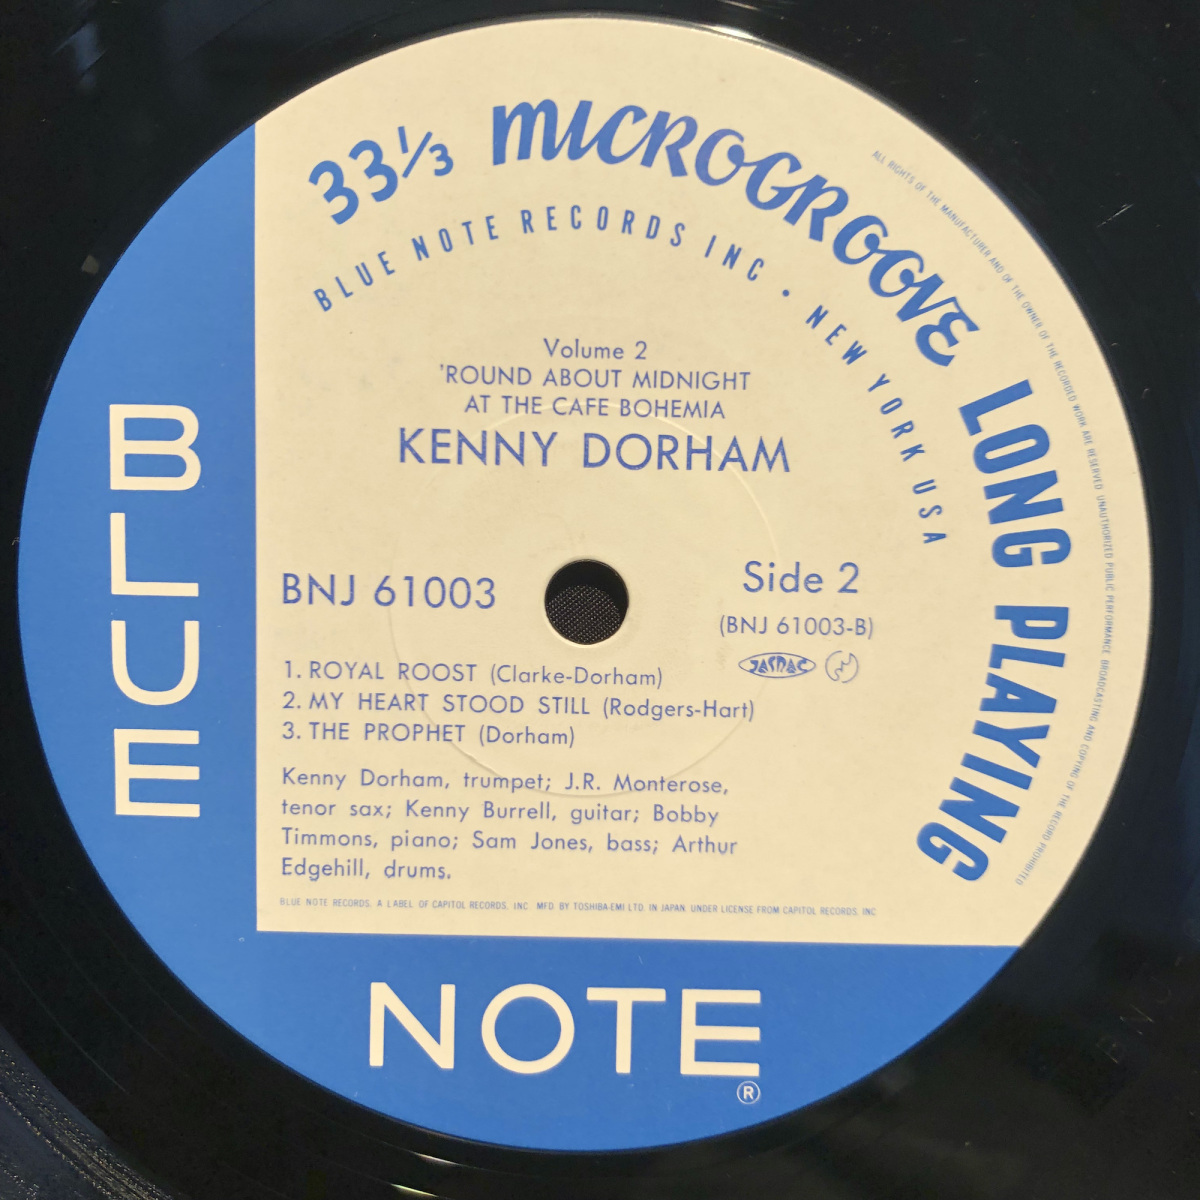 KENNY DORHAM / 'Round About Midnight At The Cafe Bohemia, Vol. 2 LP BLUE NOTE・TOSHIBA-EMI_画像5